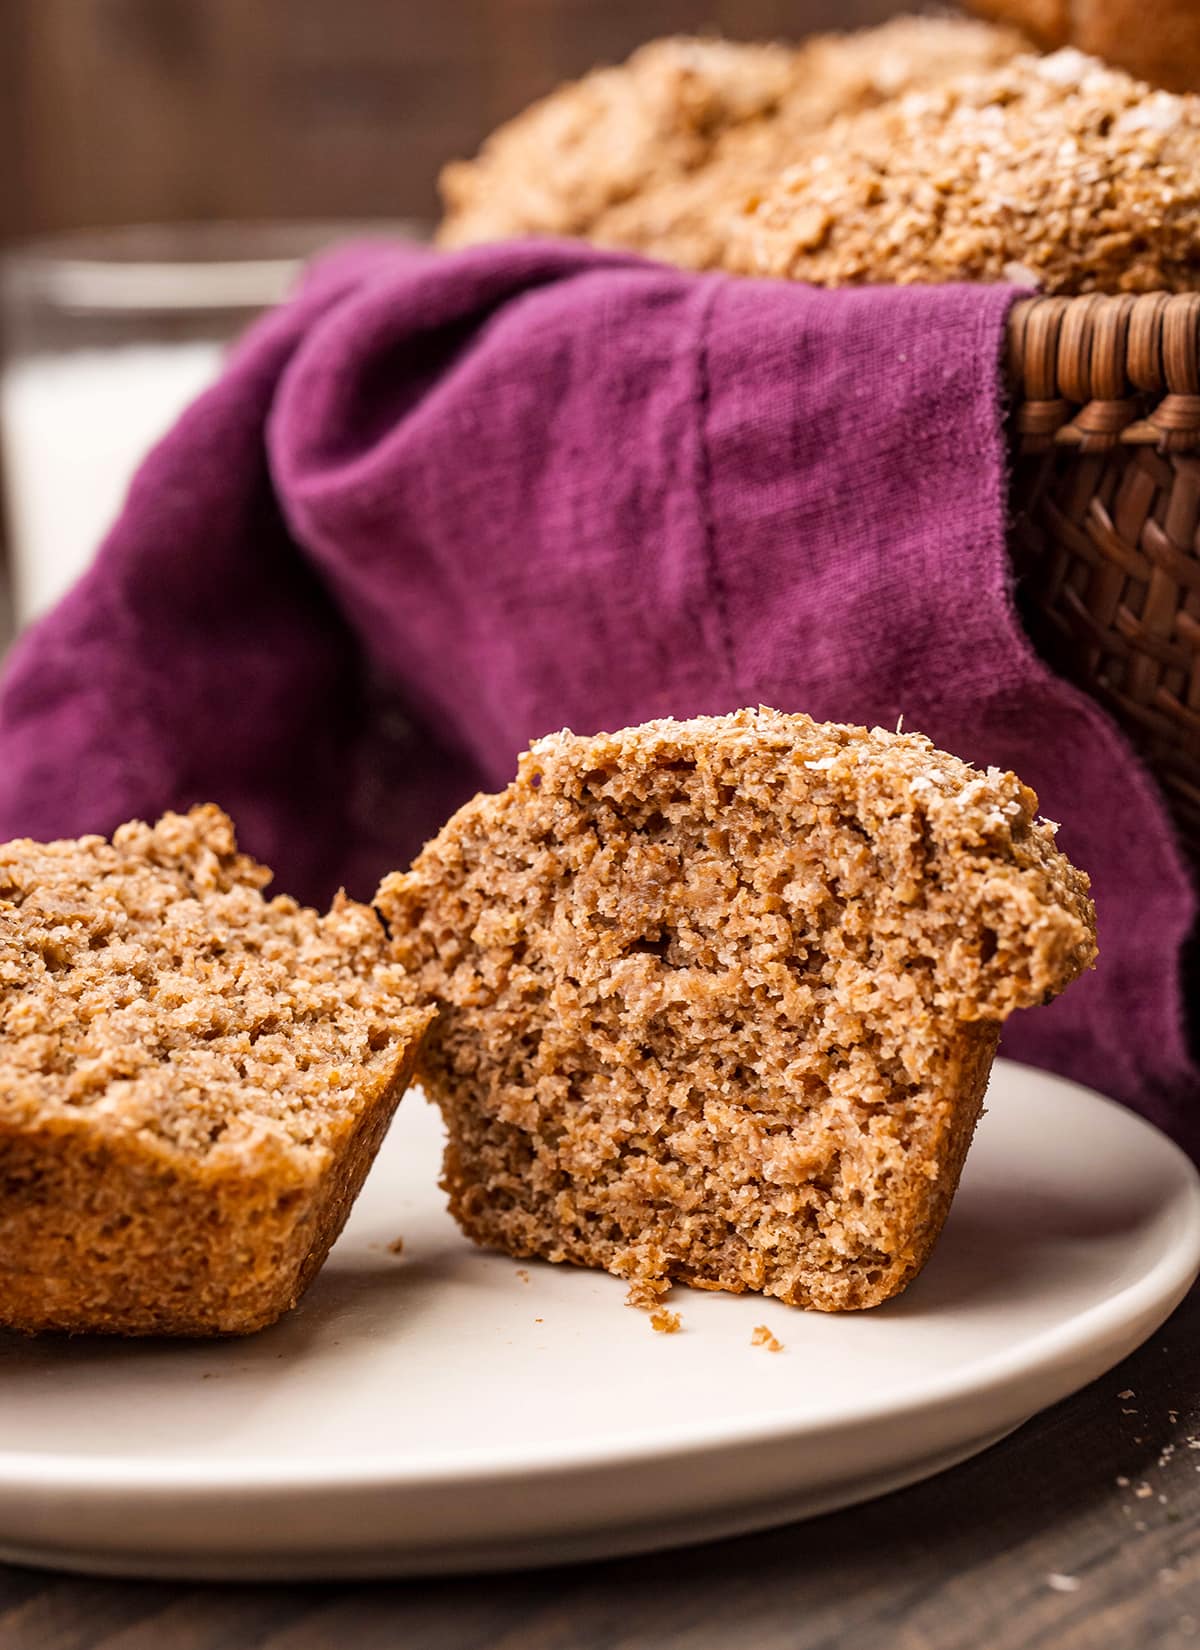 A bran muffin cut in half and put on a white plate.